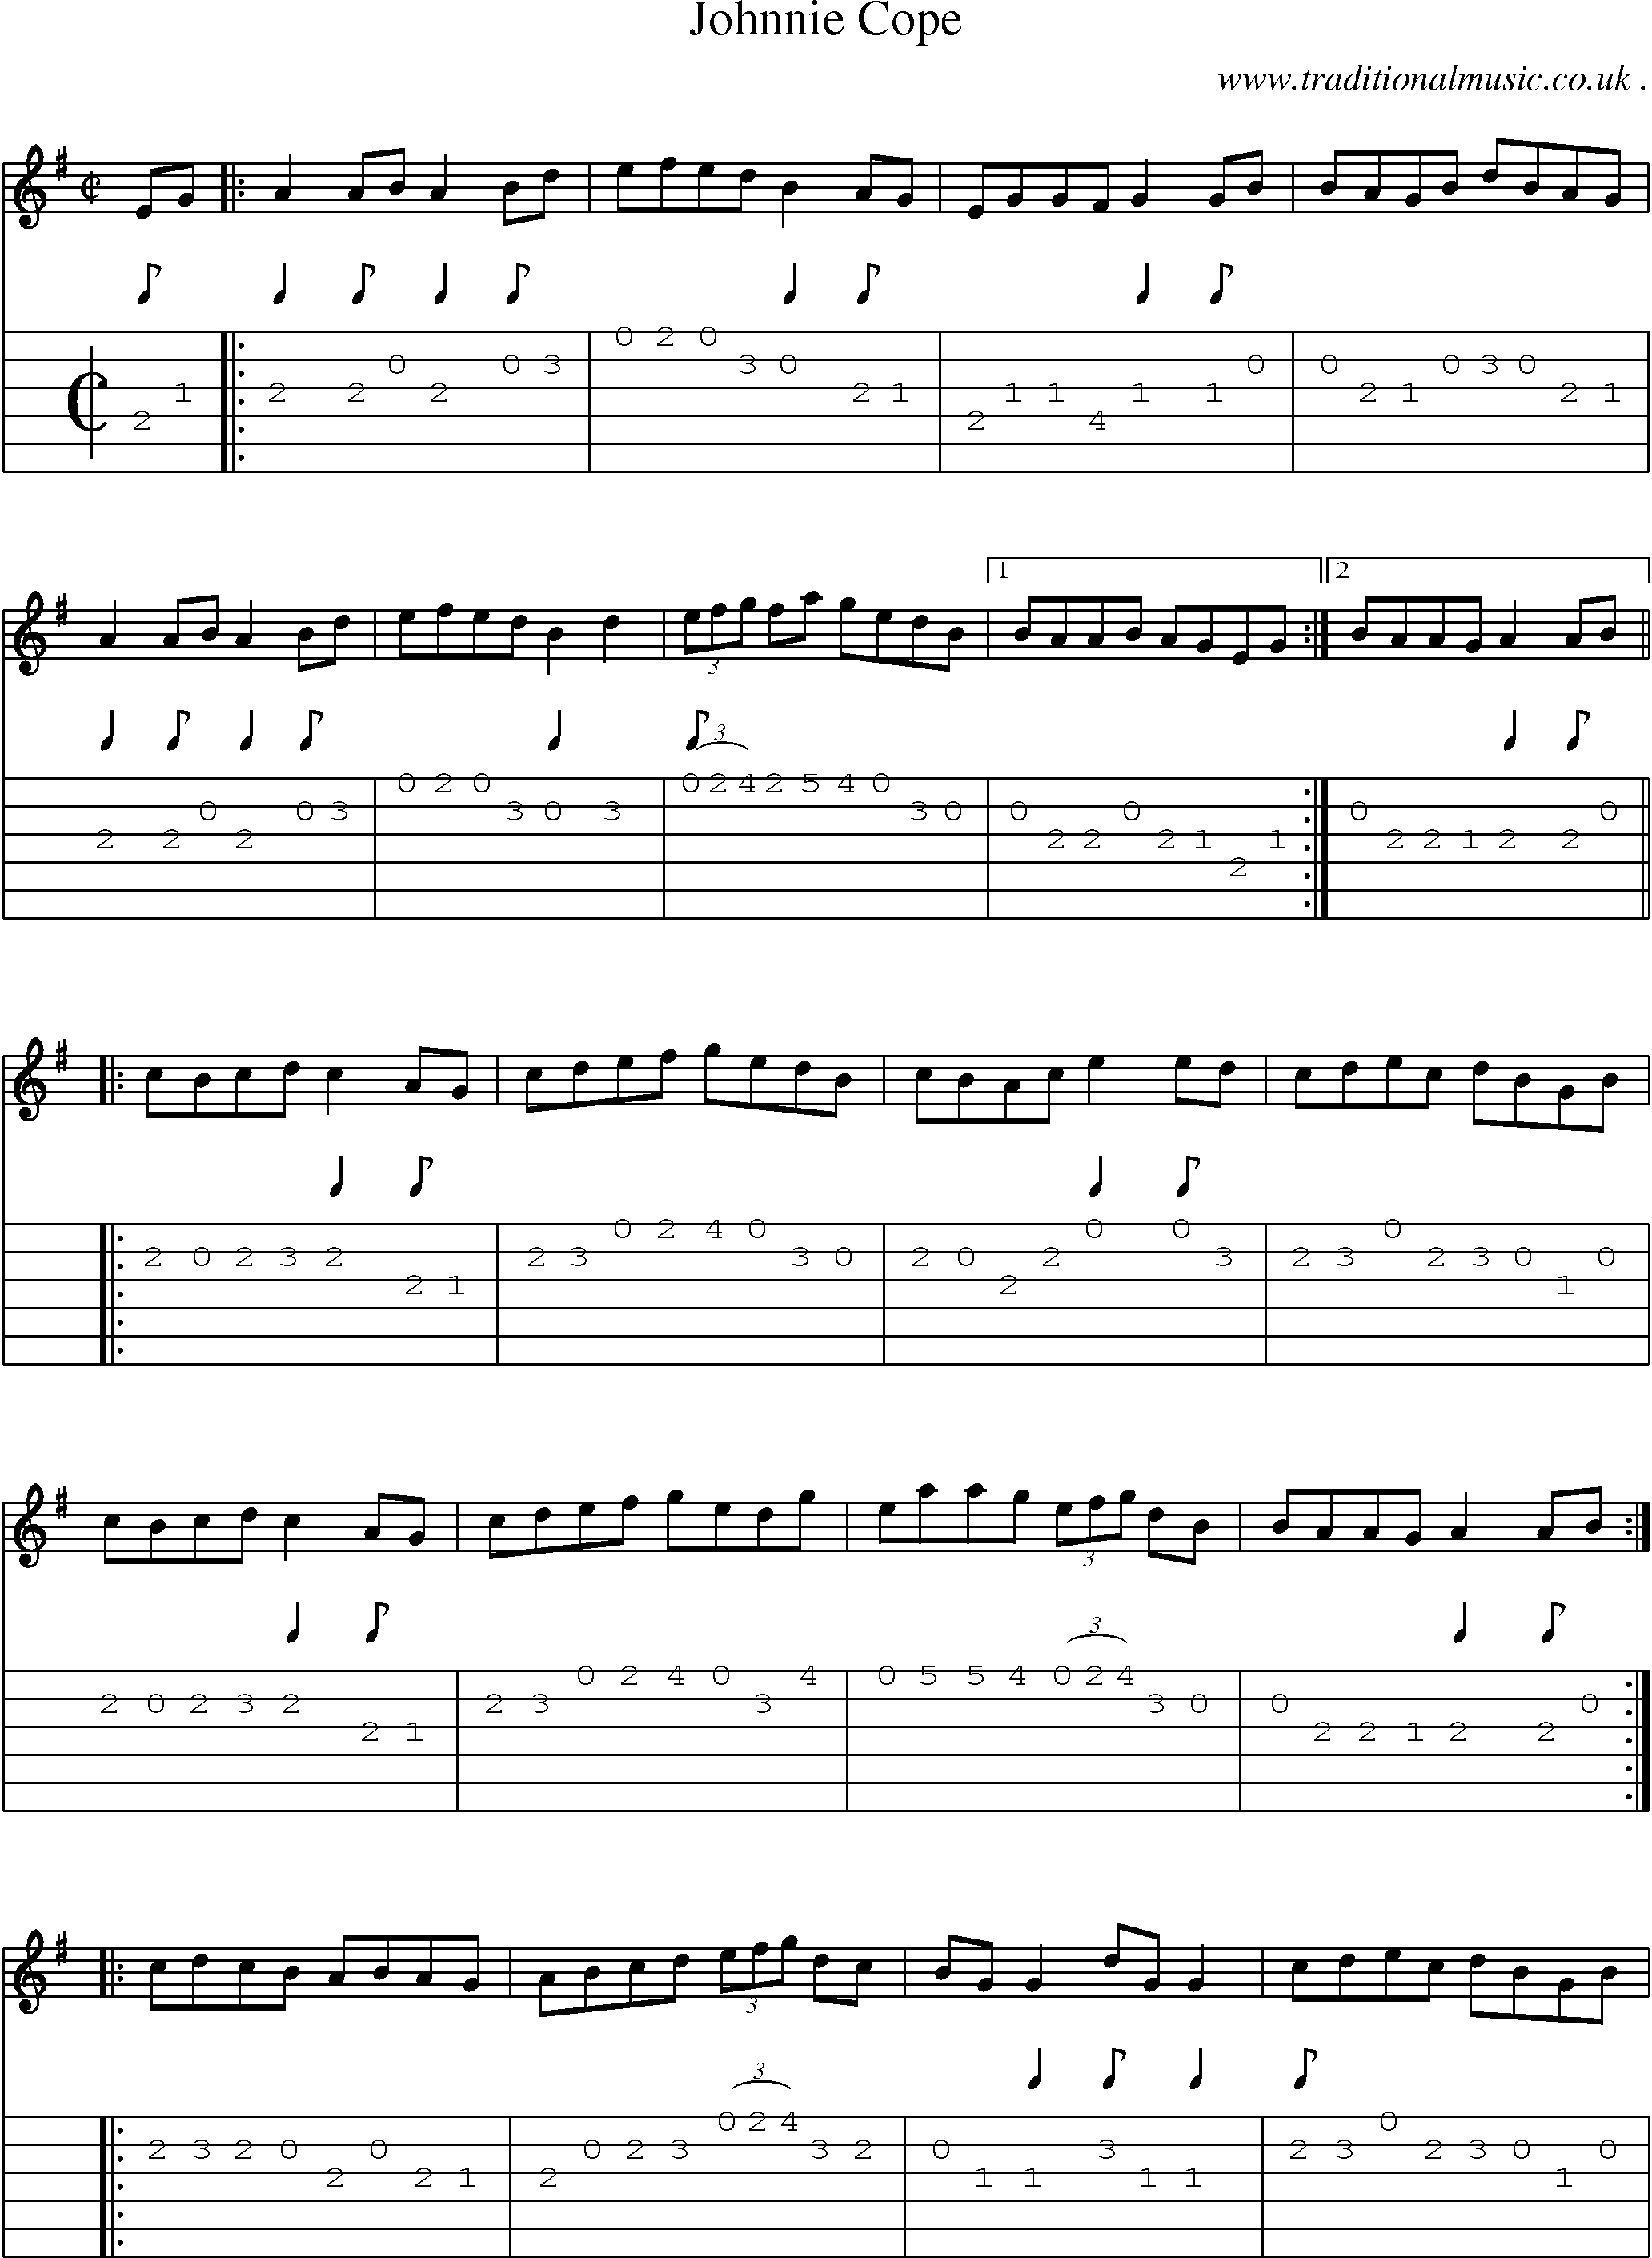 Sheet-Music and Guitar Tabs for Johnnie Cope